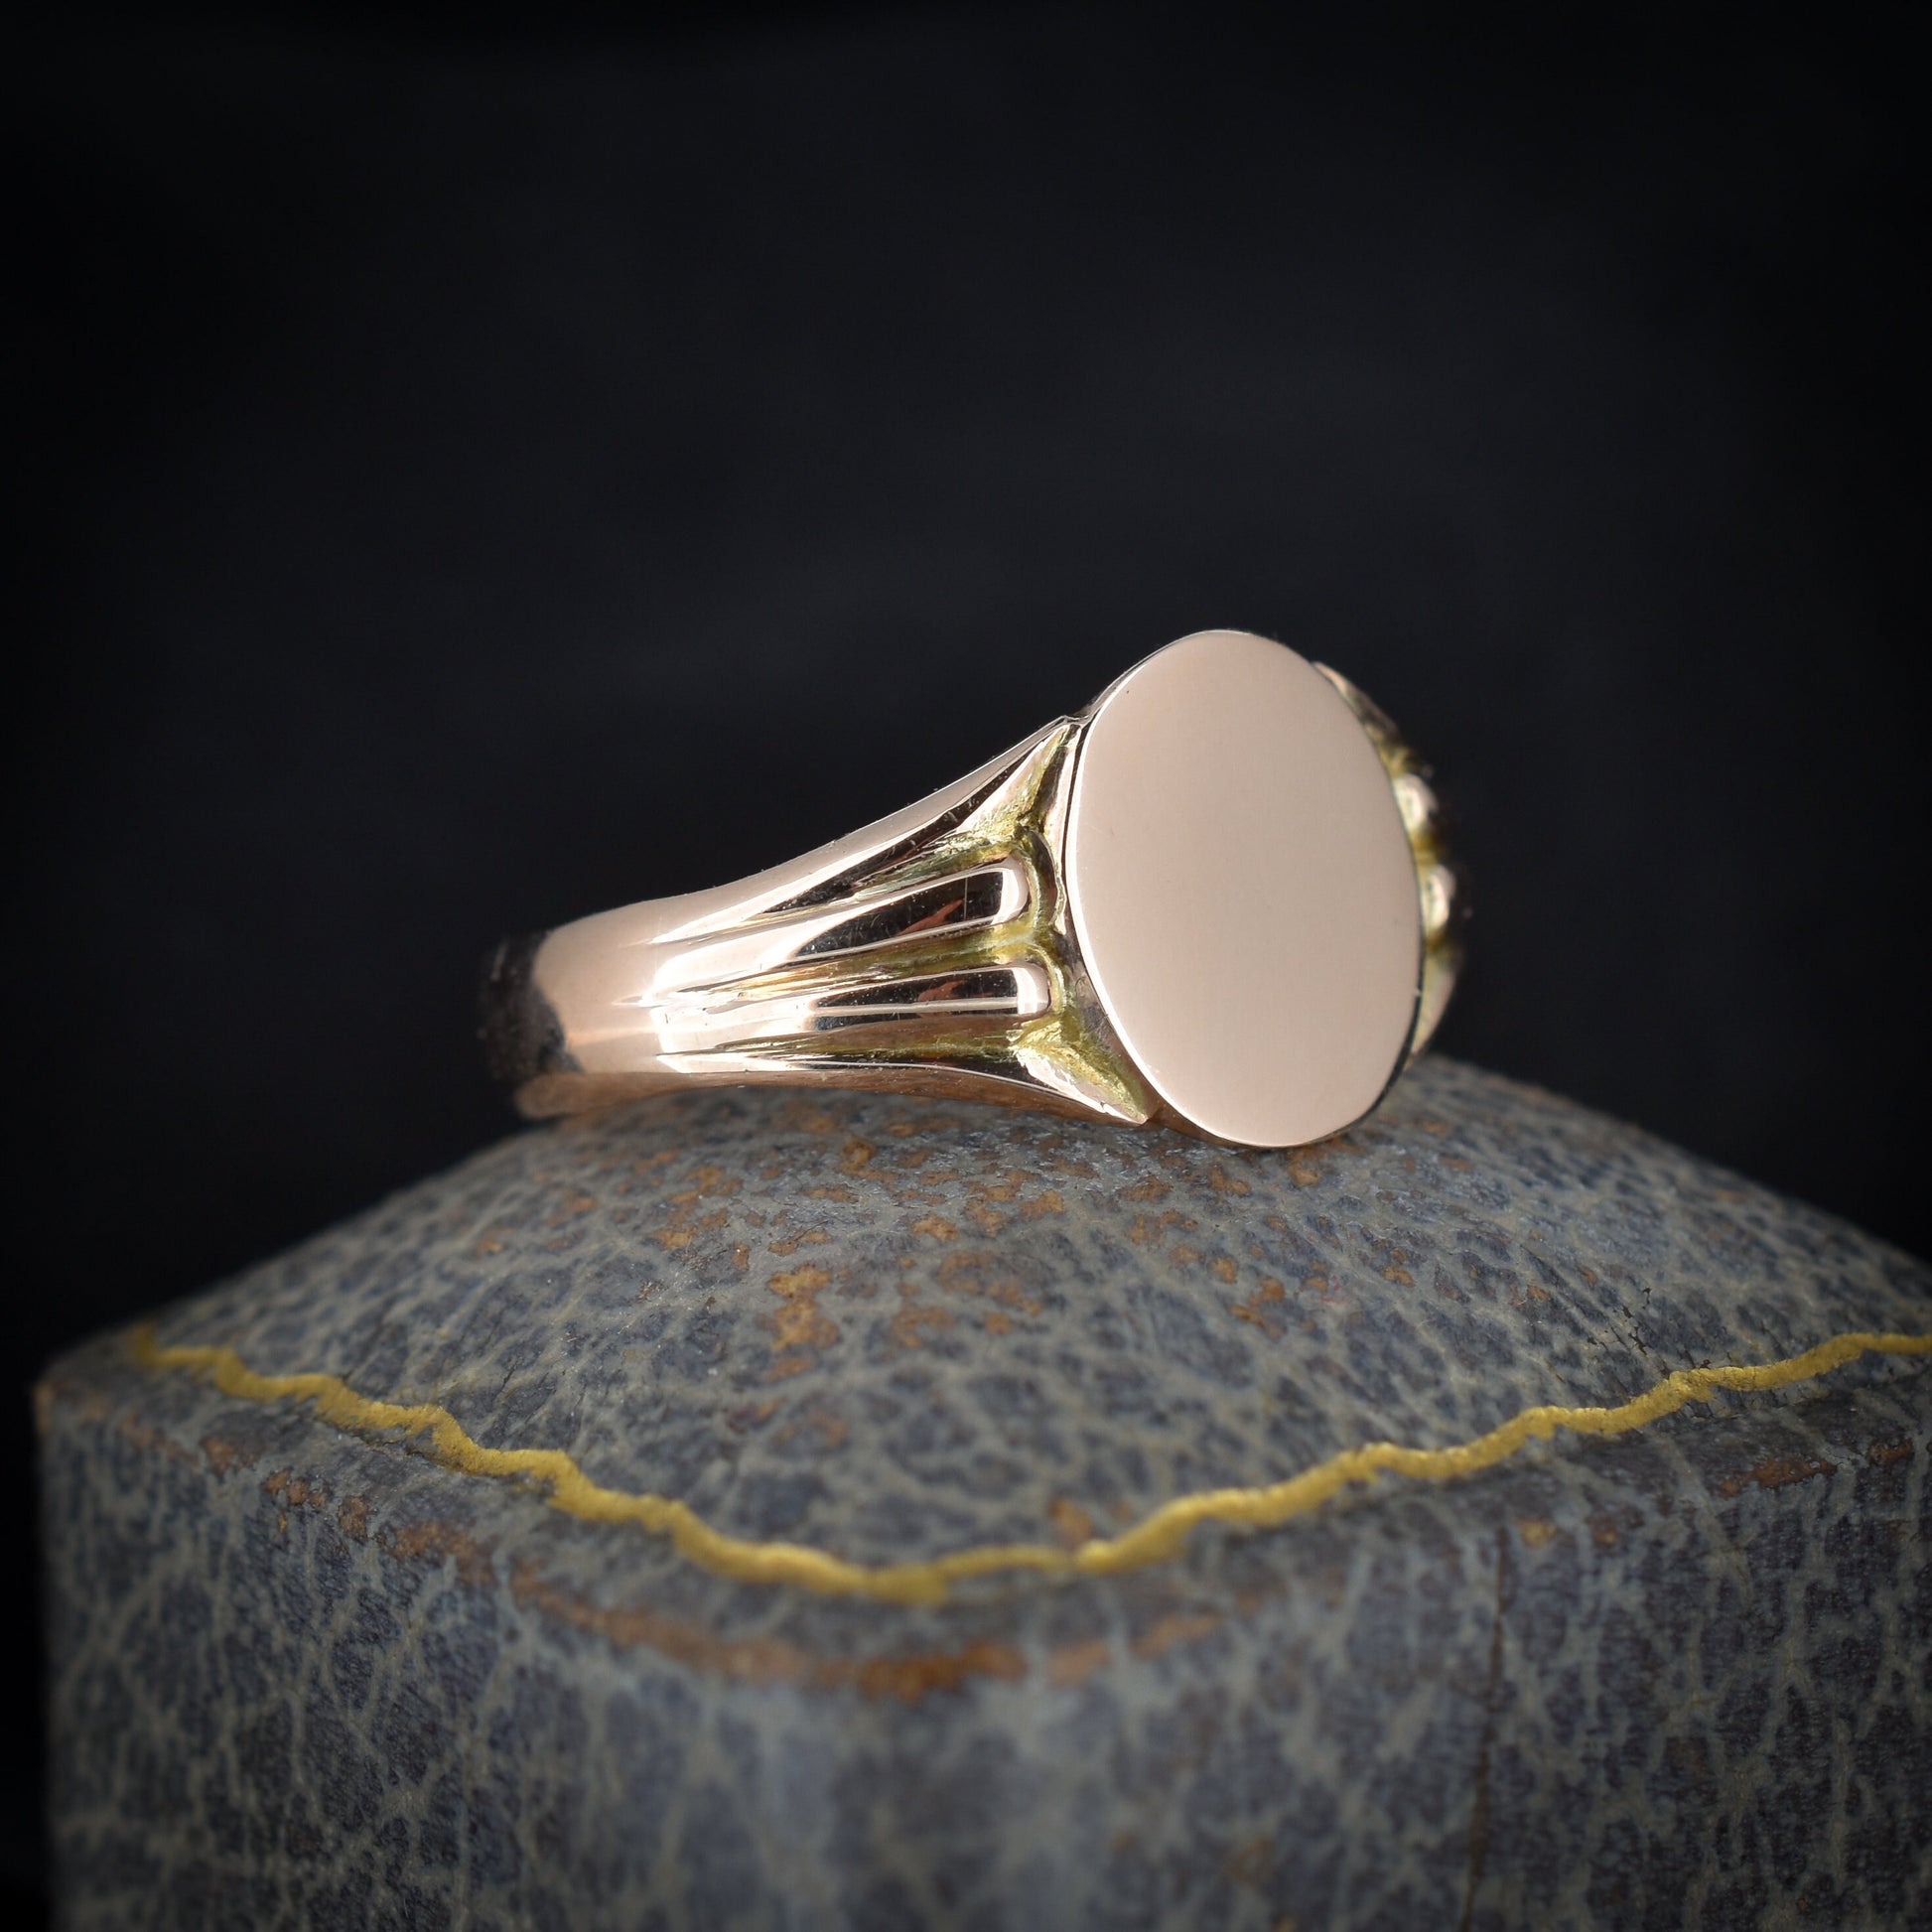 Antique 9ct Gold Oval Signet Ring - Dated Birmingham 1917